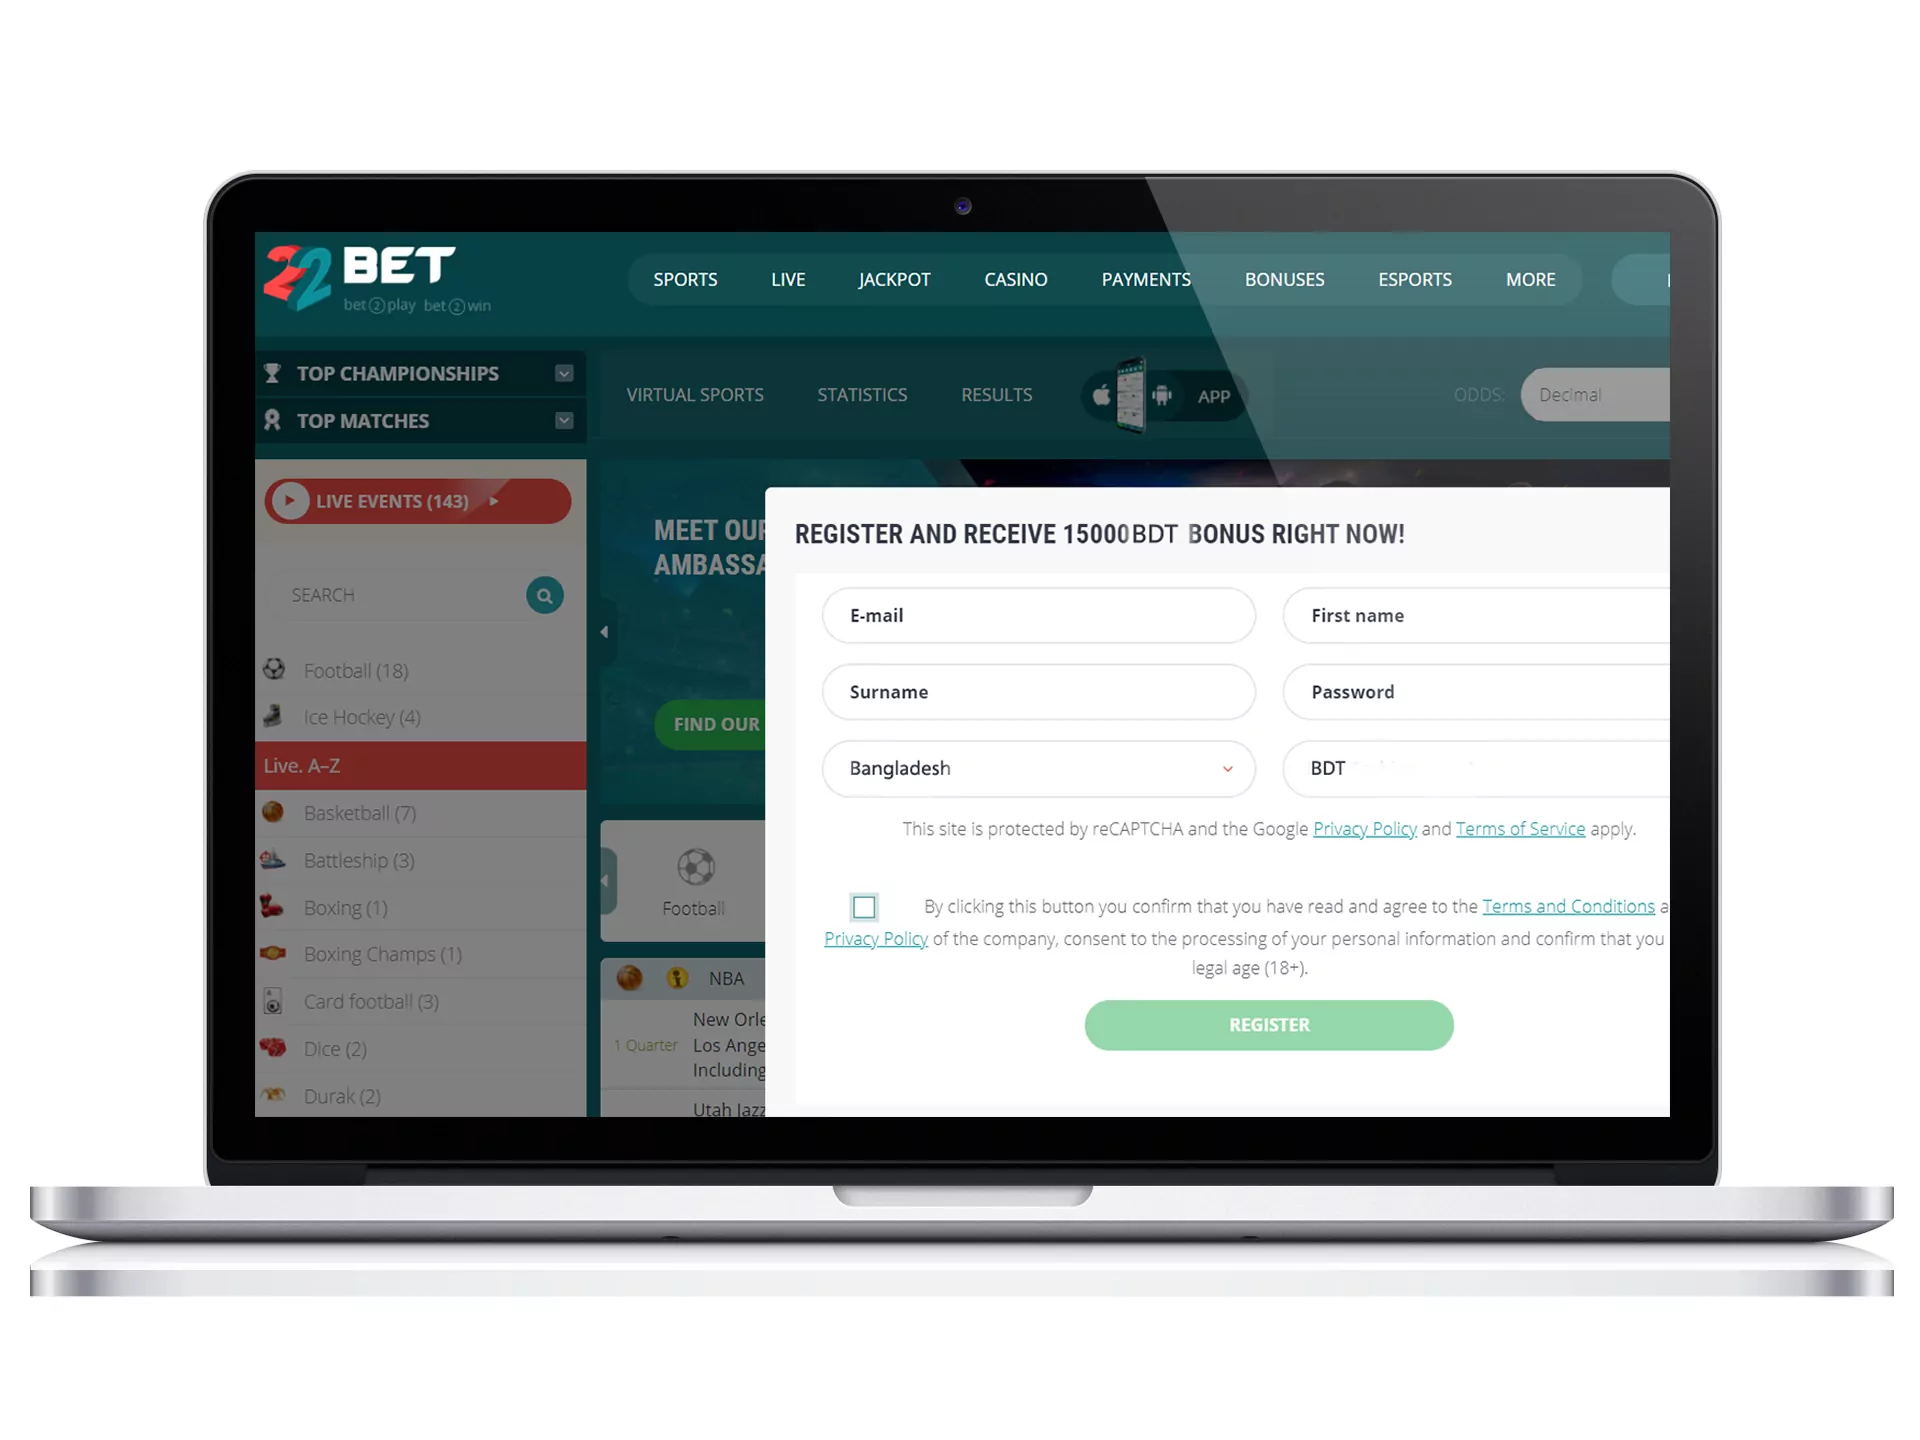 Registration on the 22bet website – step-by-step instruction.